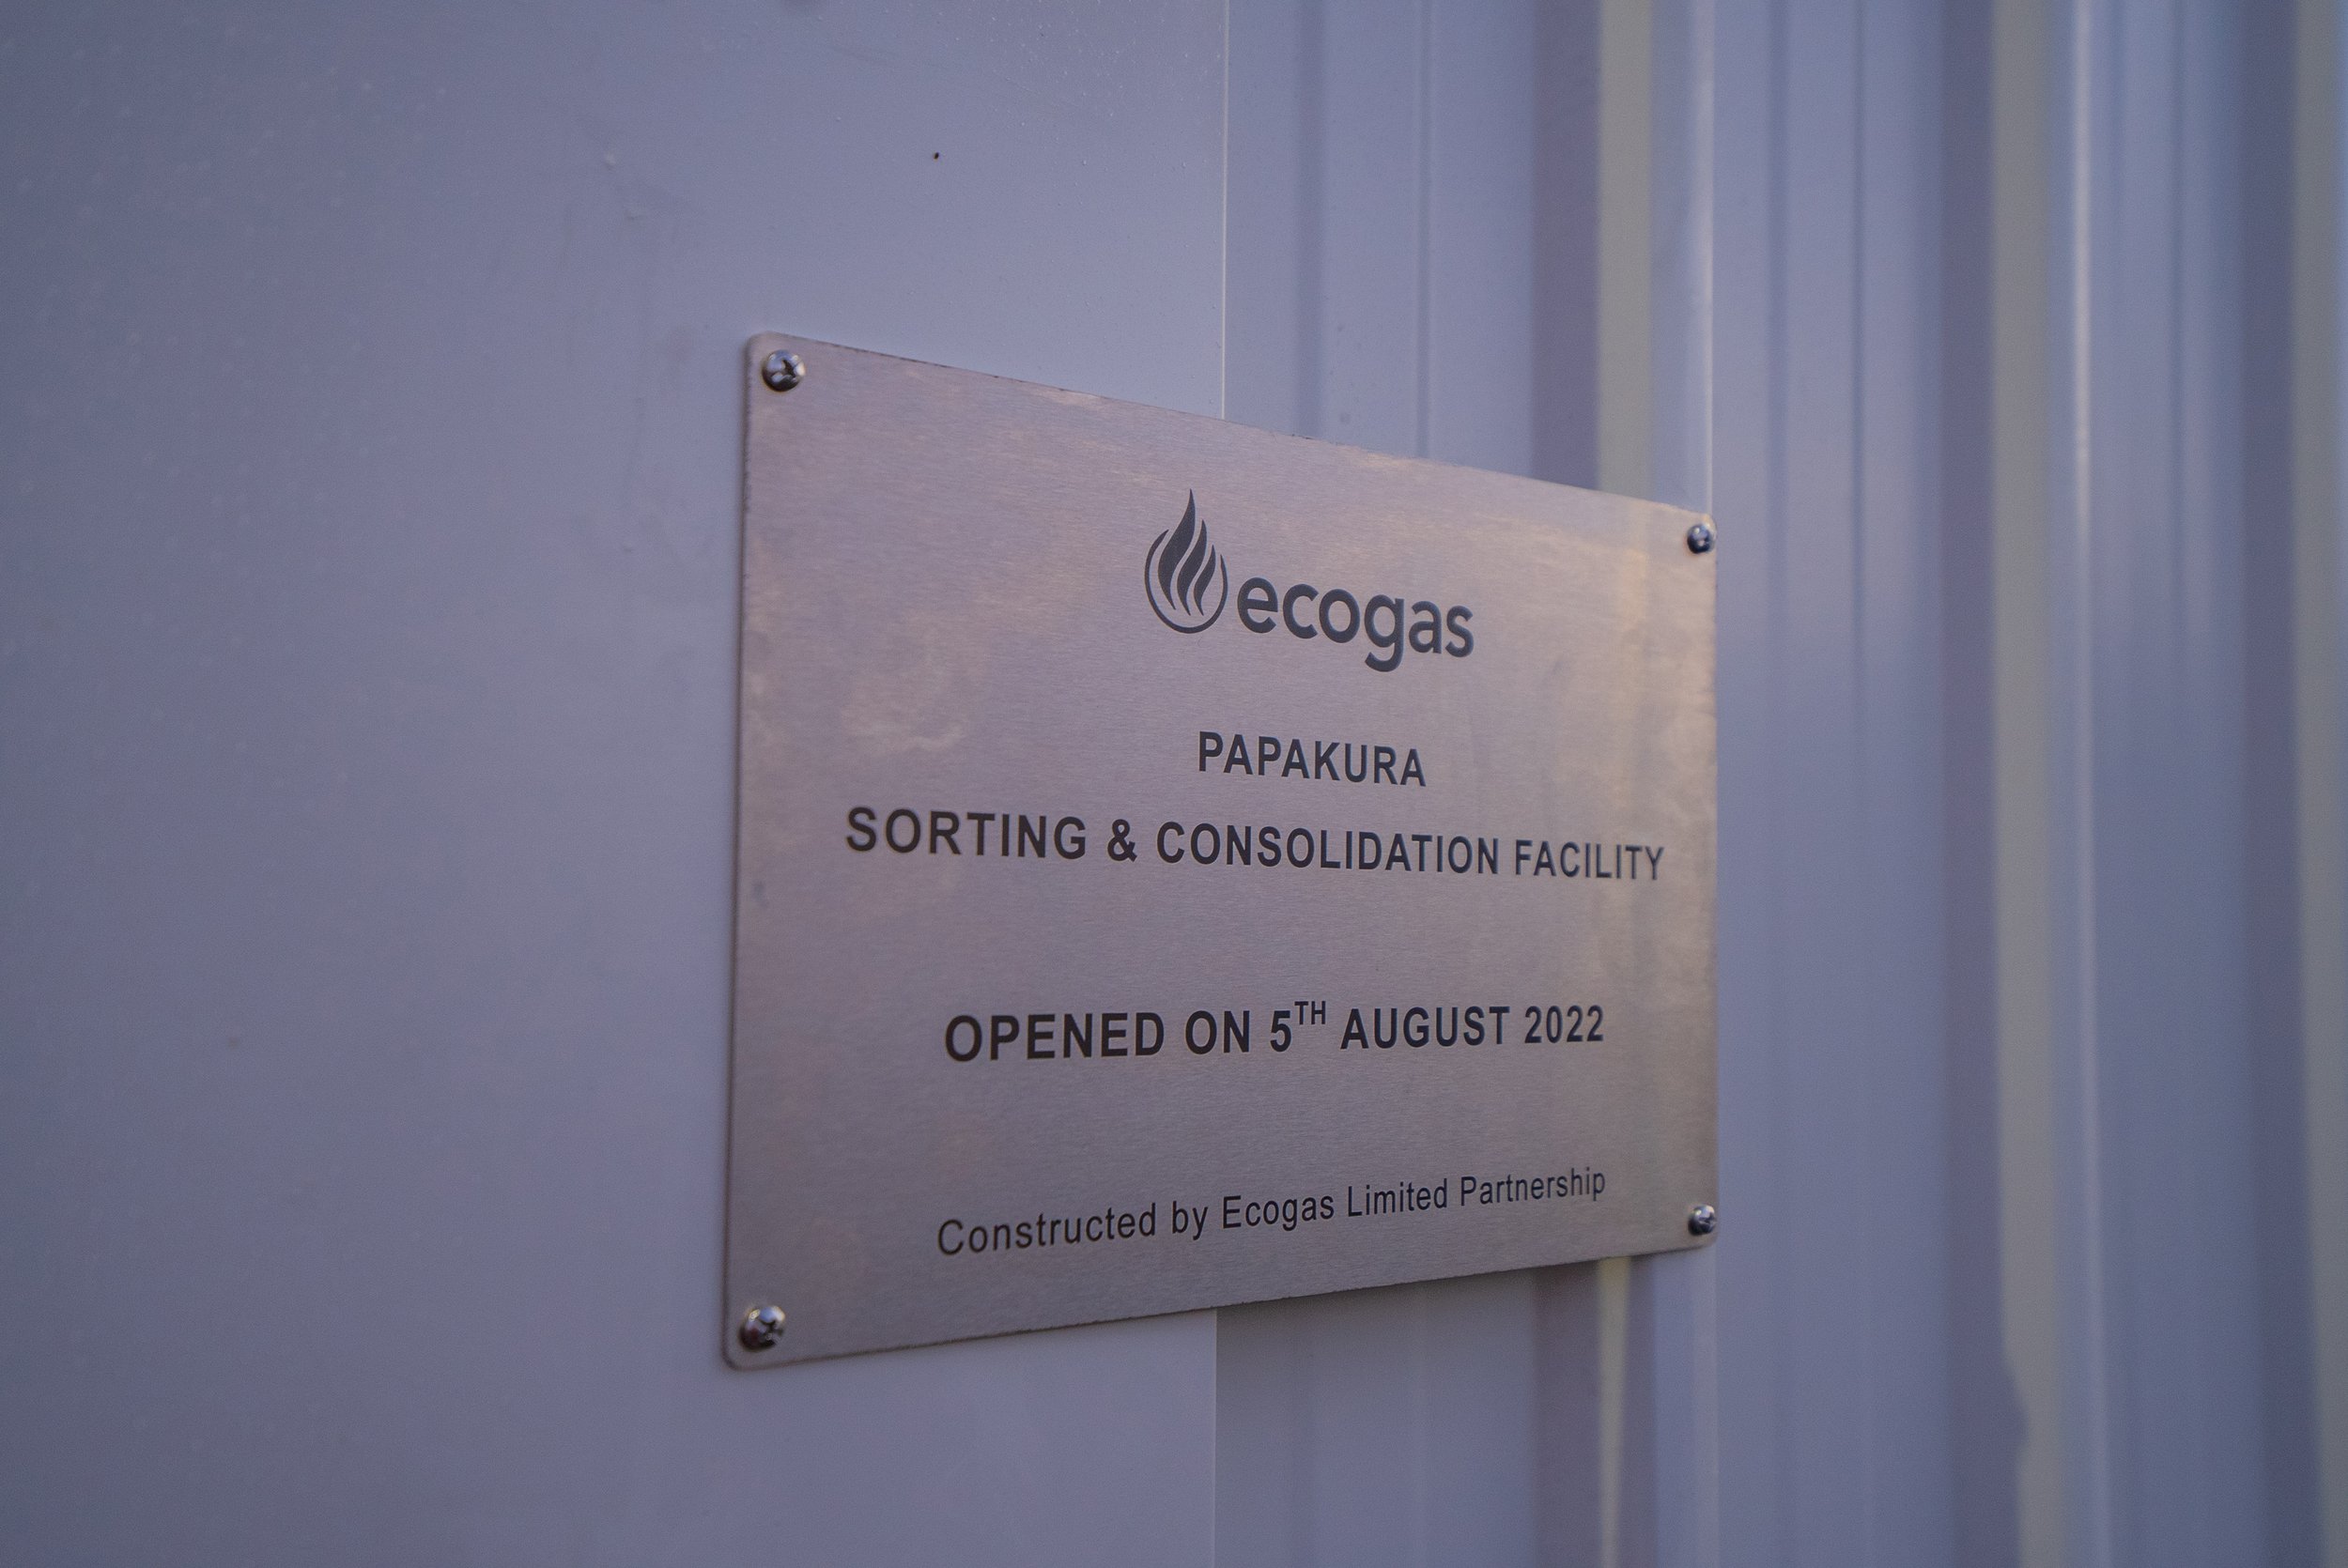 Plaque commemorating the opening of the Papakura SCF